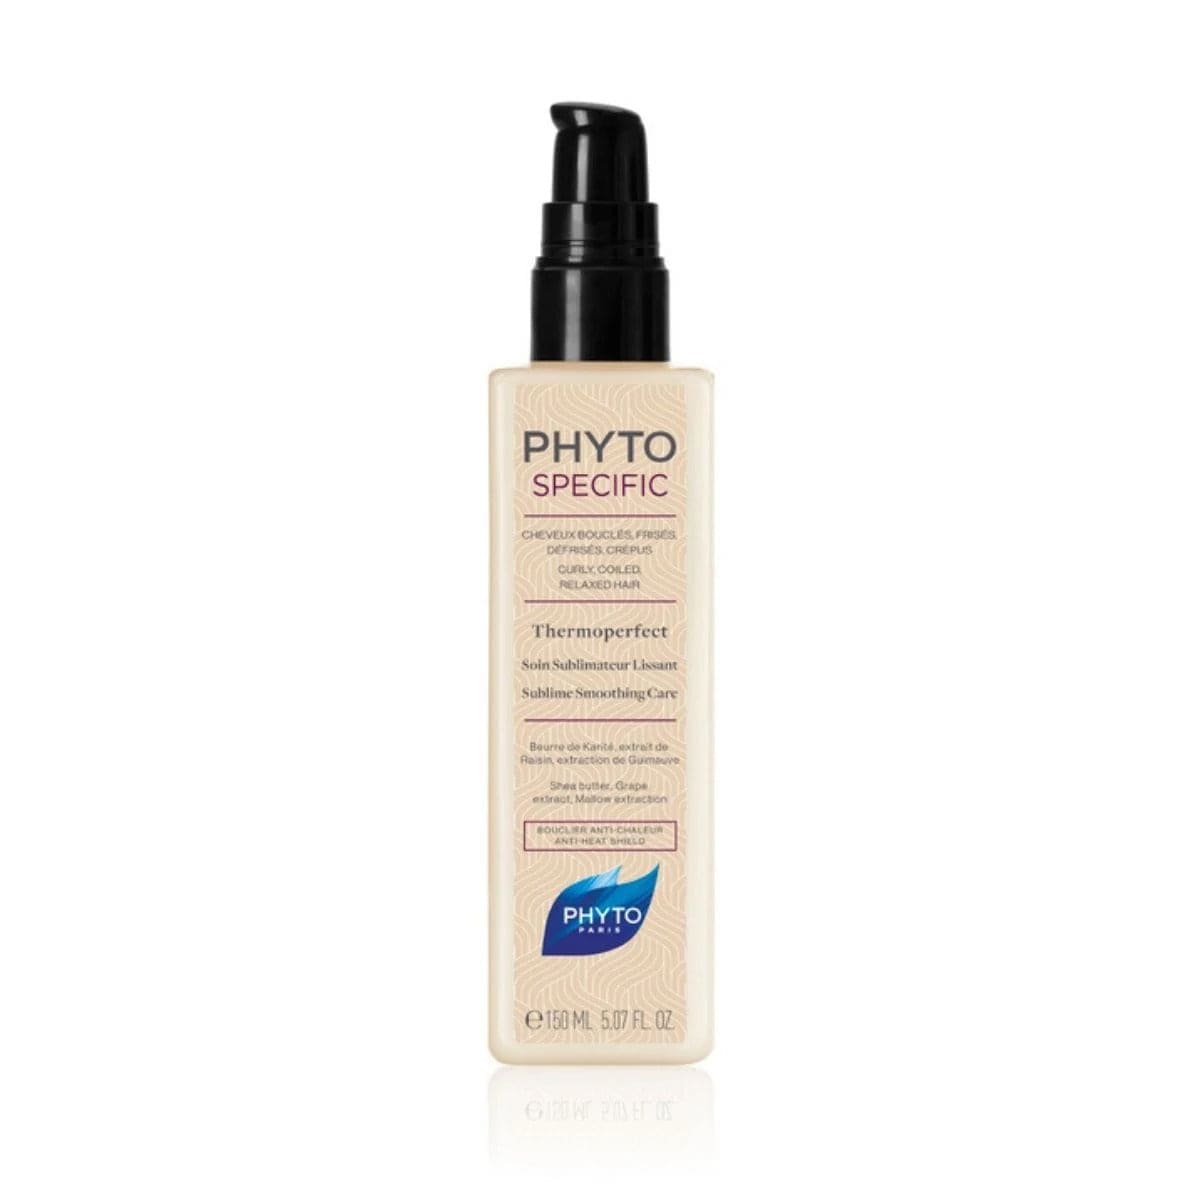 PHYTO Soins & Beauté Phytospecific (thermoperfect)  150ml